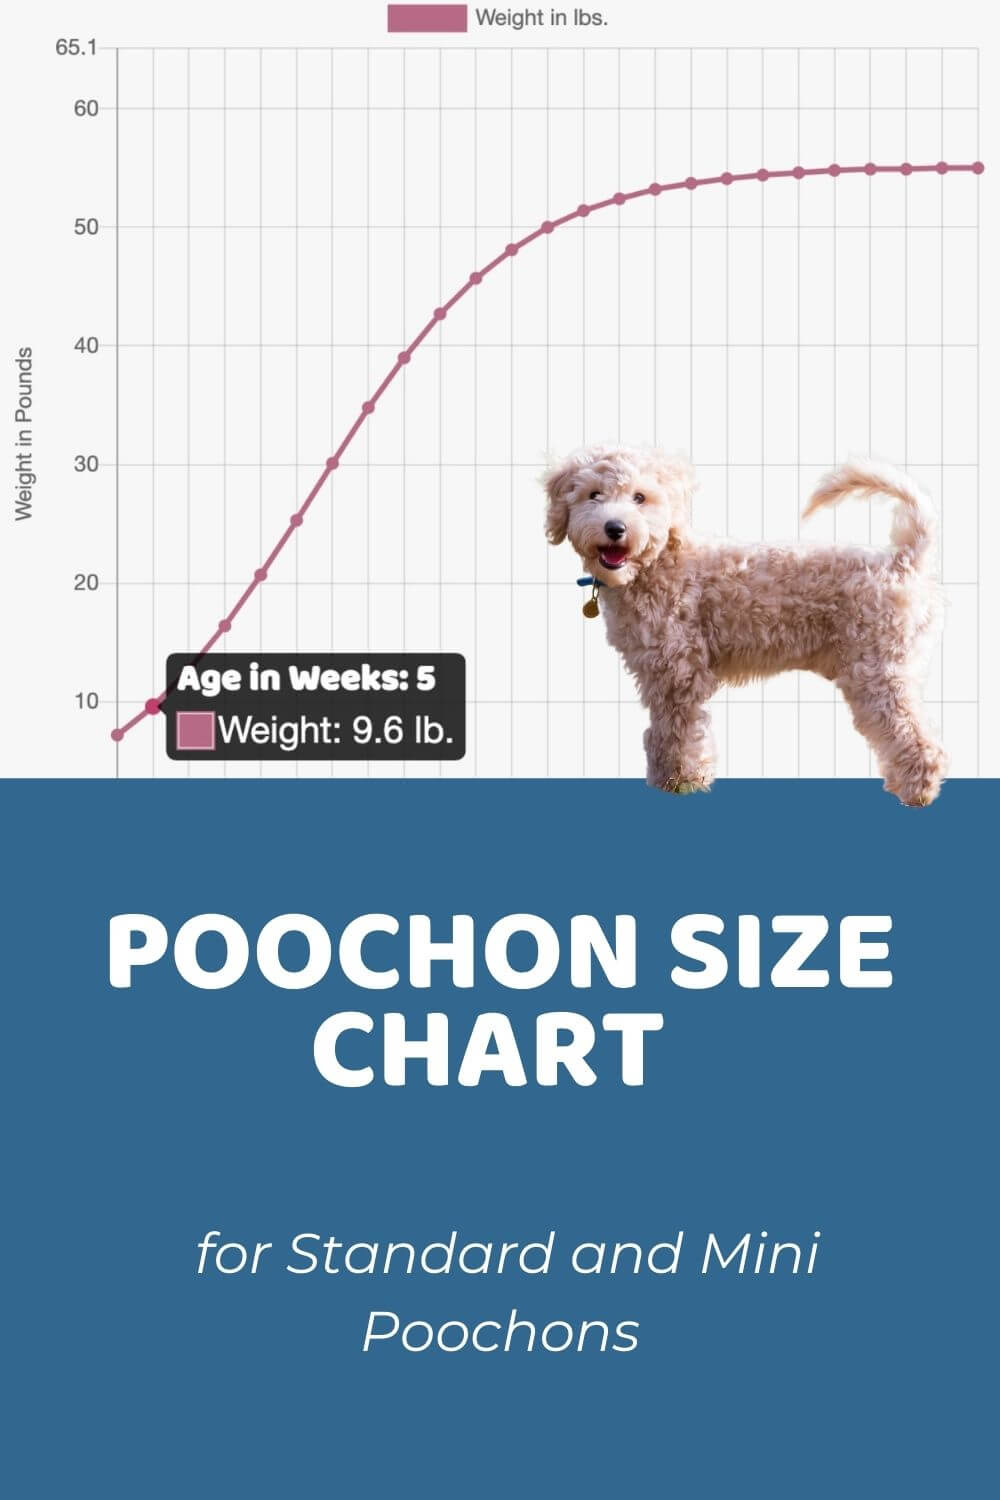 Poochon Size Chart for Standard and Mini Poochons